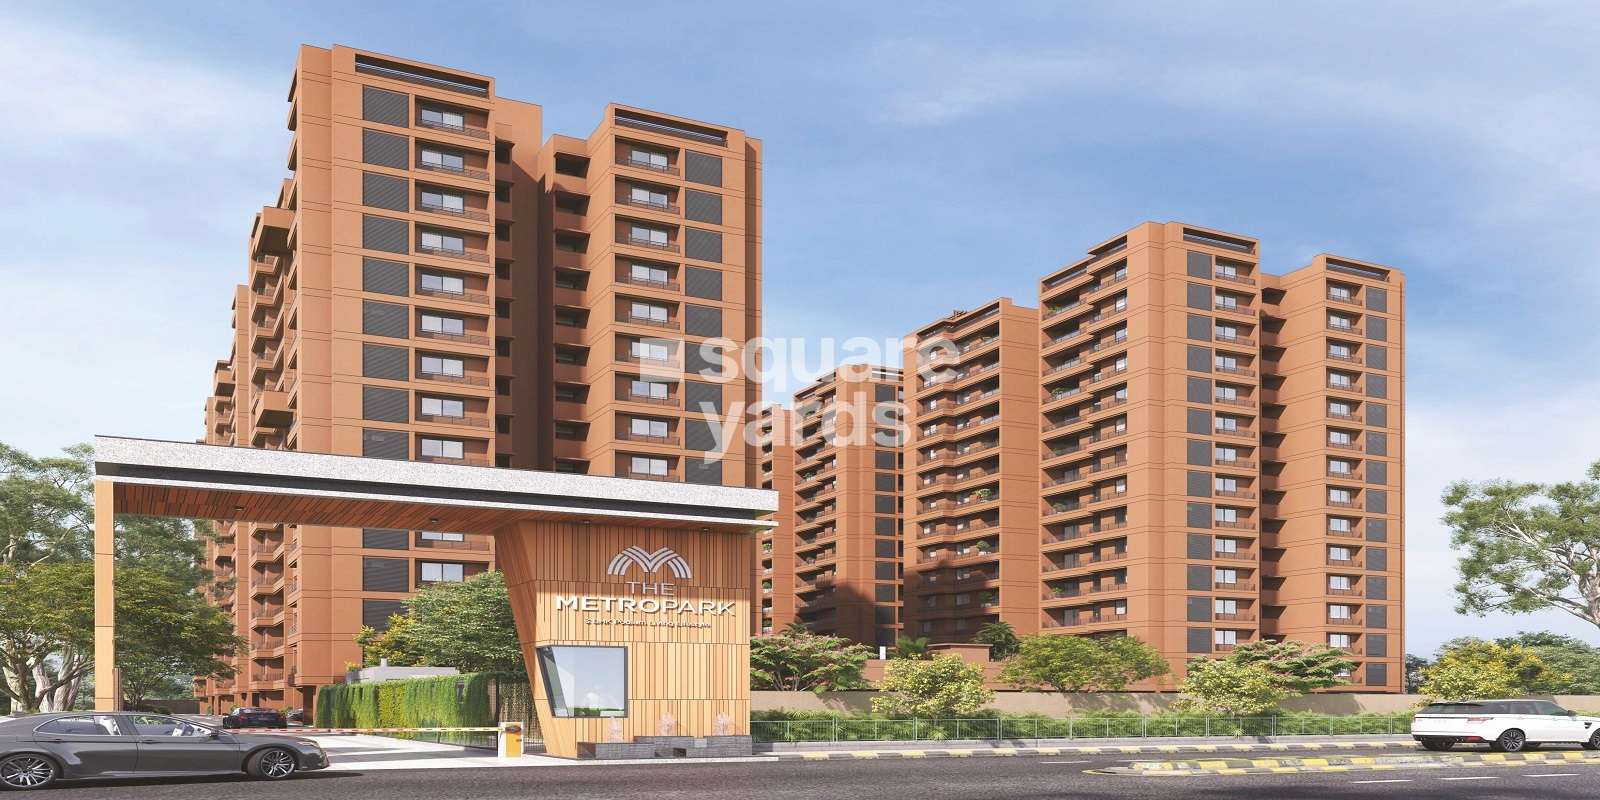 Property in Vastral-Odhav Ring Road, Ahmedabad - Flats, Apartments, Villa  Houses for sale in Vastral-Odhav Ring Road, Ahmedabad | Homeonline